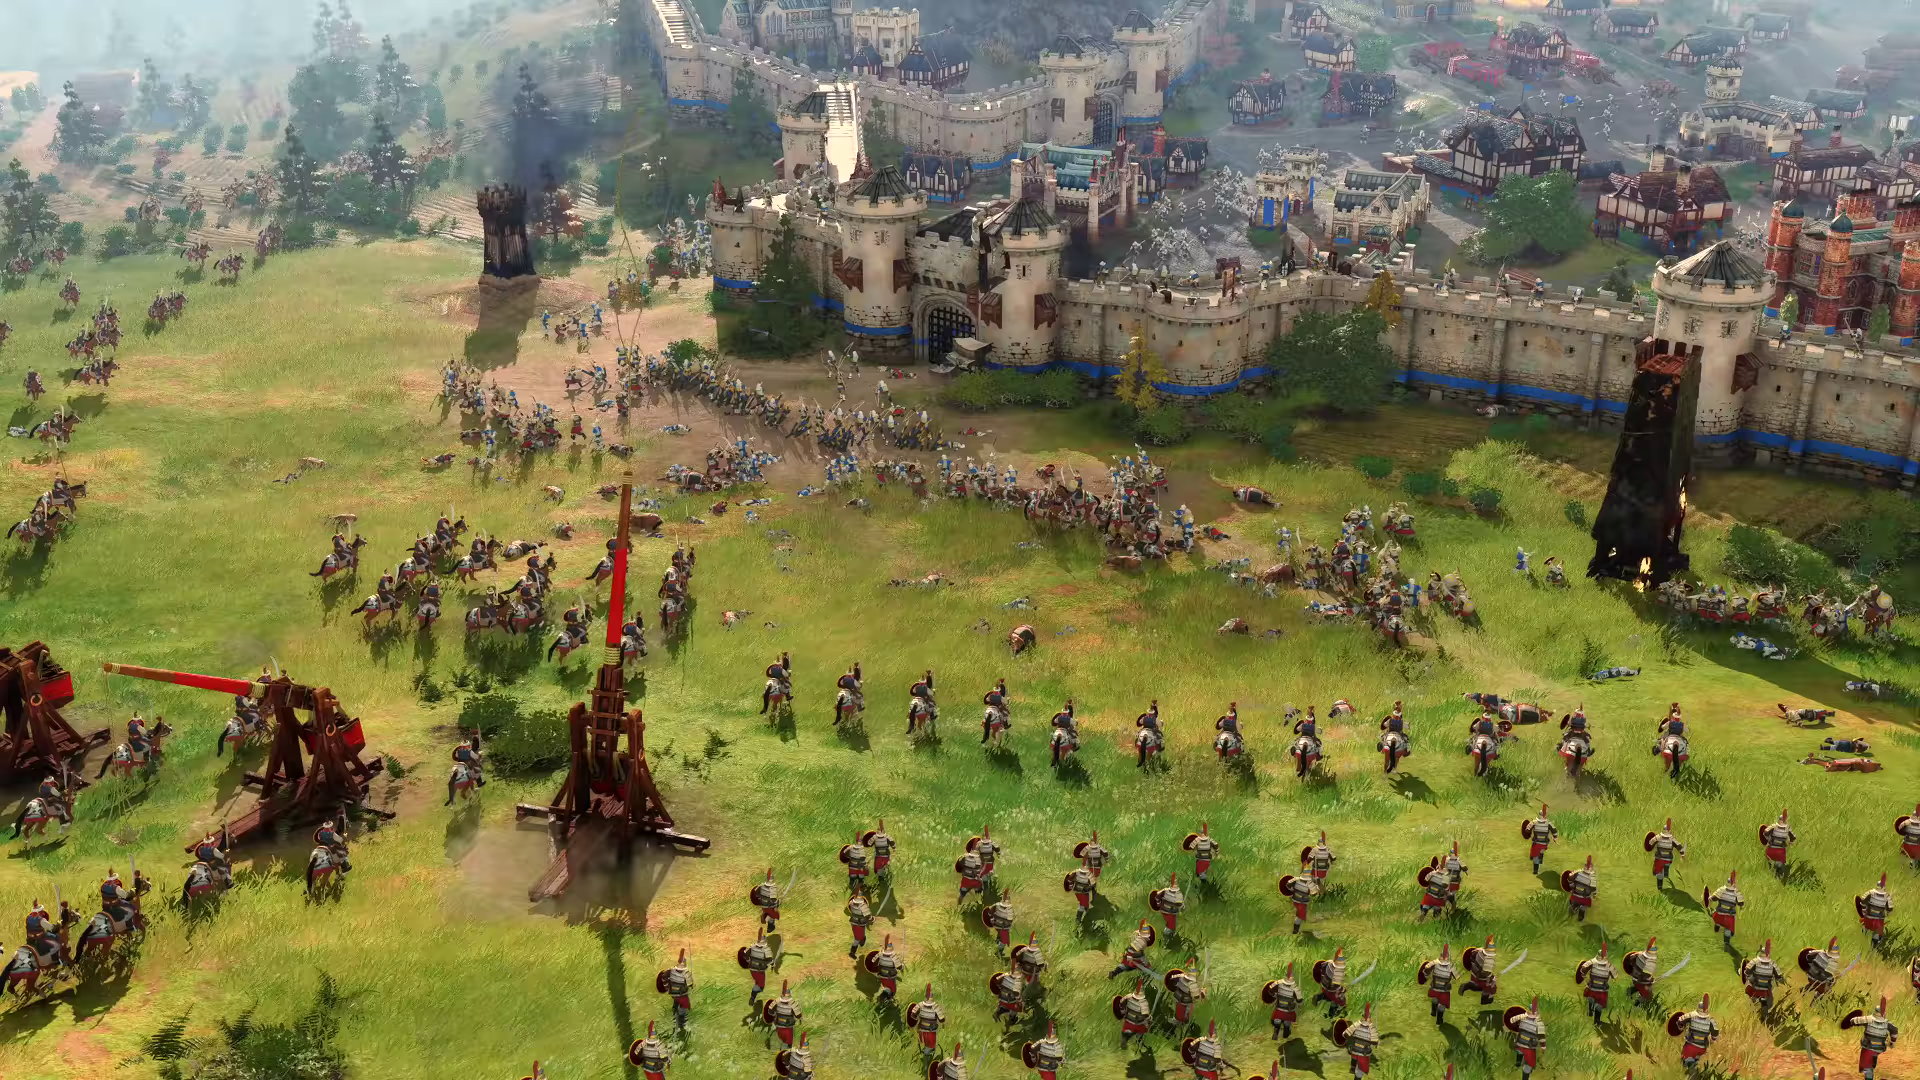 age of empires playstation 4